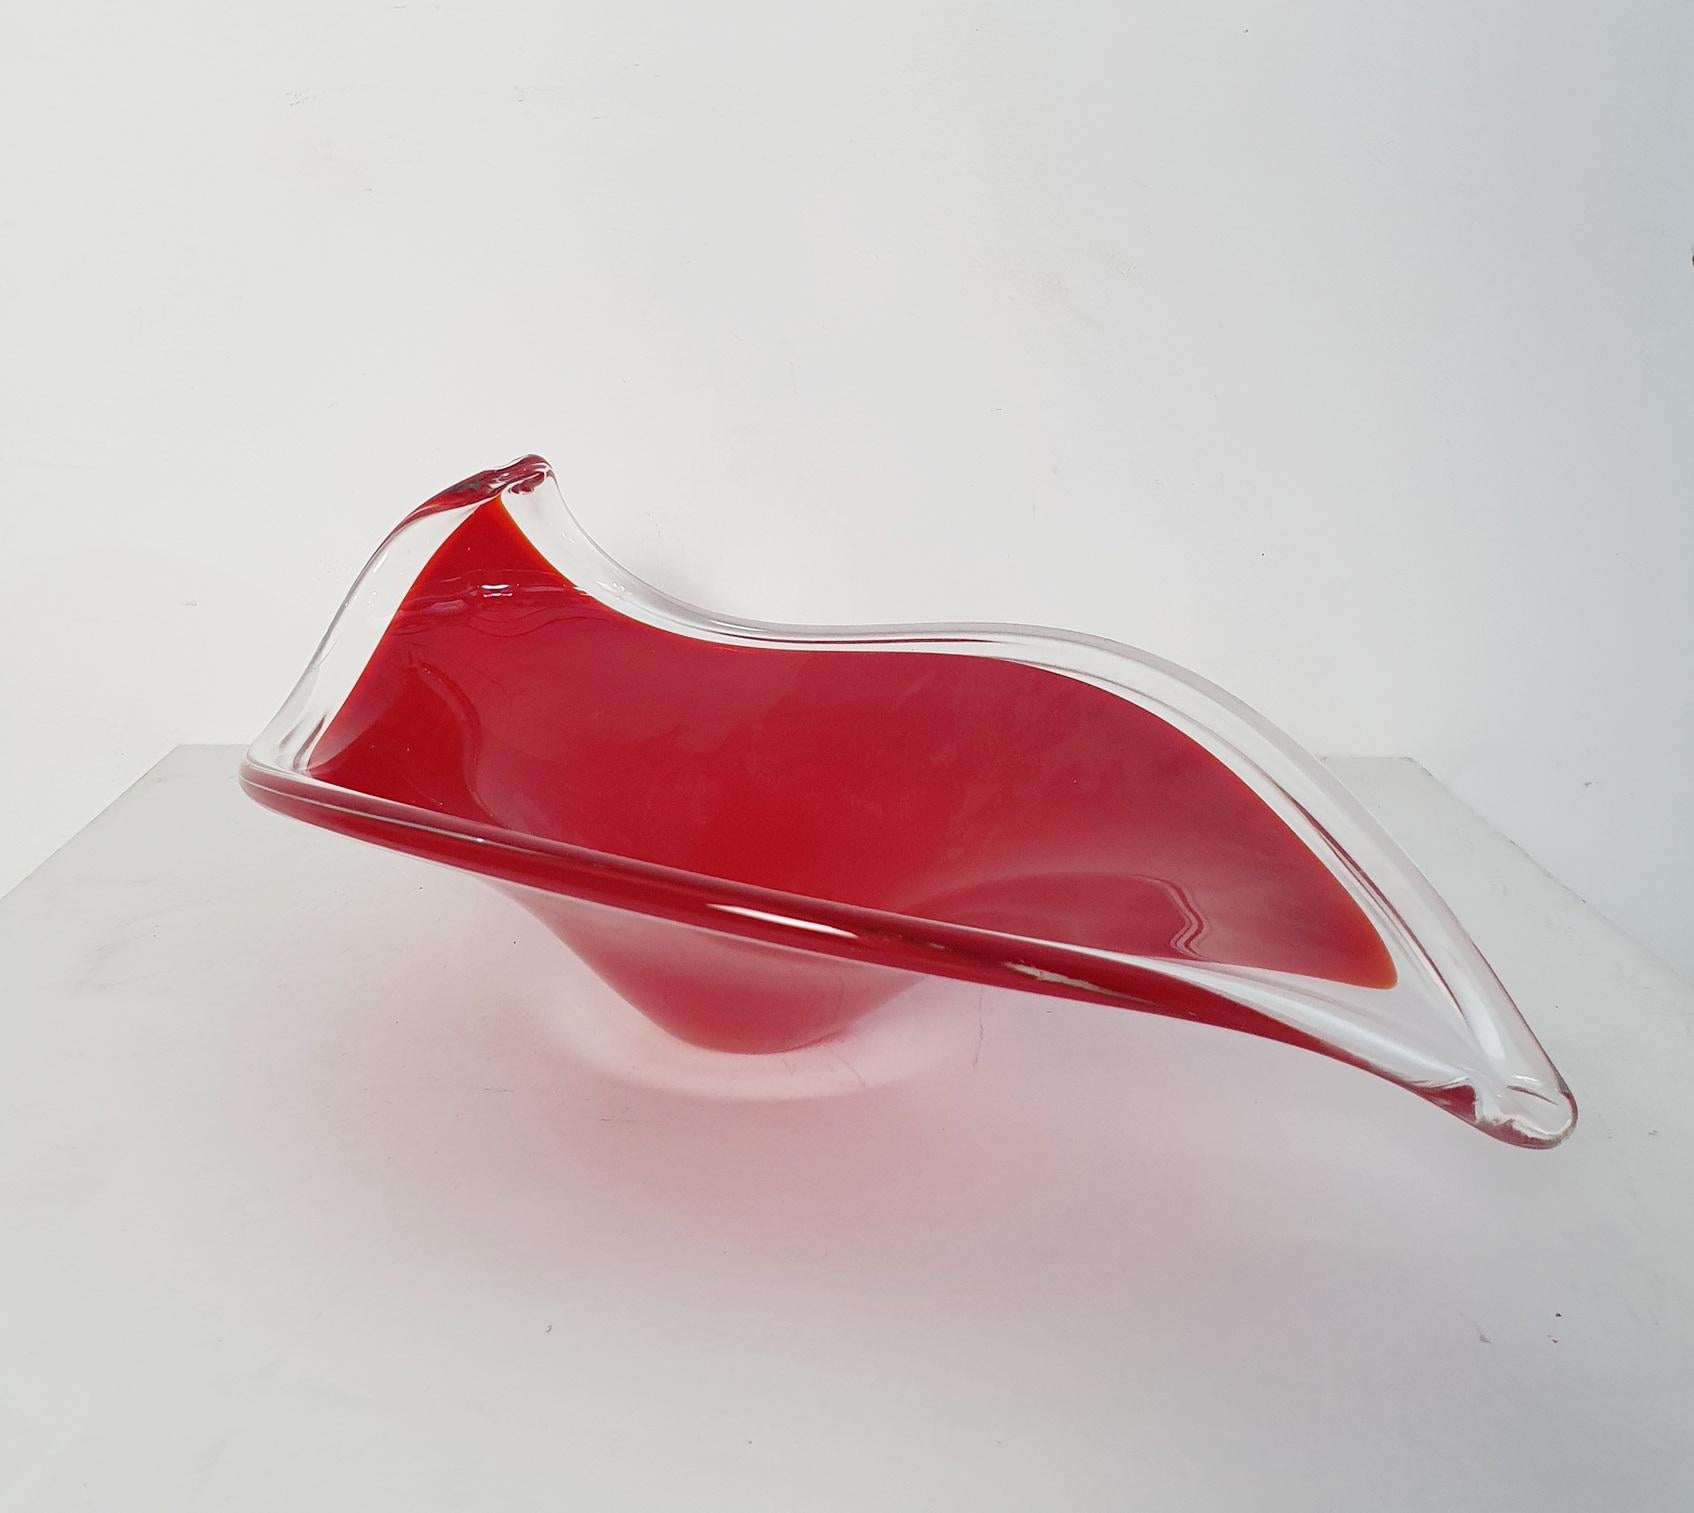 Decorative and meticulously crafted in Murano glass, this bowl boasts a distinctive leaf shape and substantial weight. The interplay of red and clear glass forms a harmonious blend, expertly fashioned by hand. Its impeccable condition is marked by